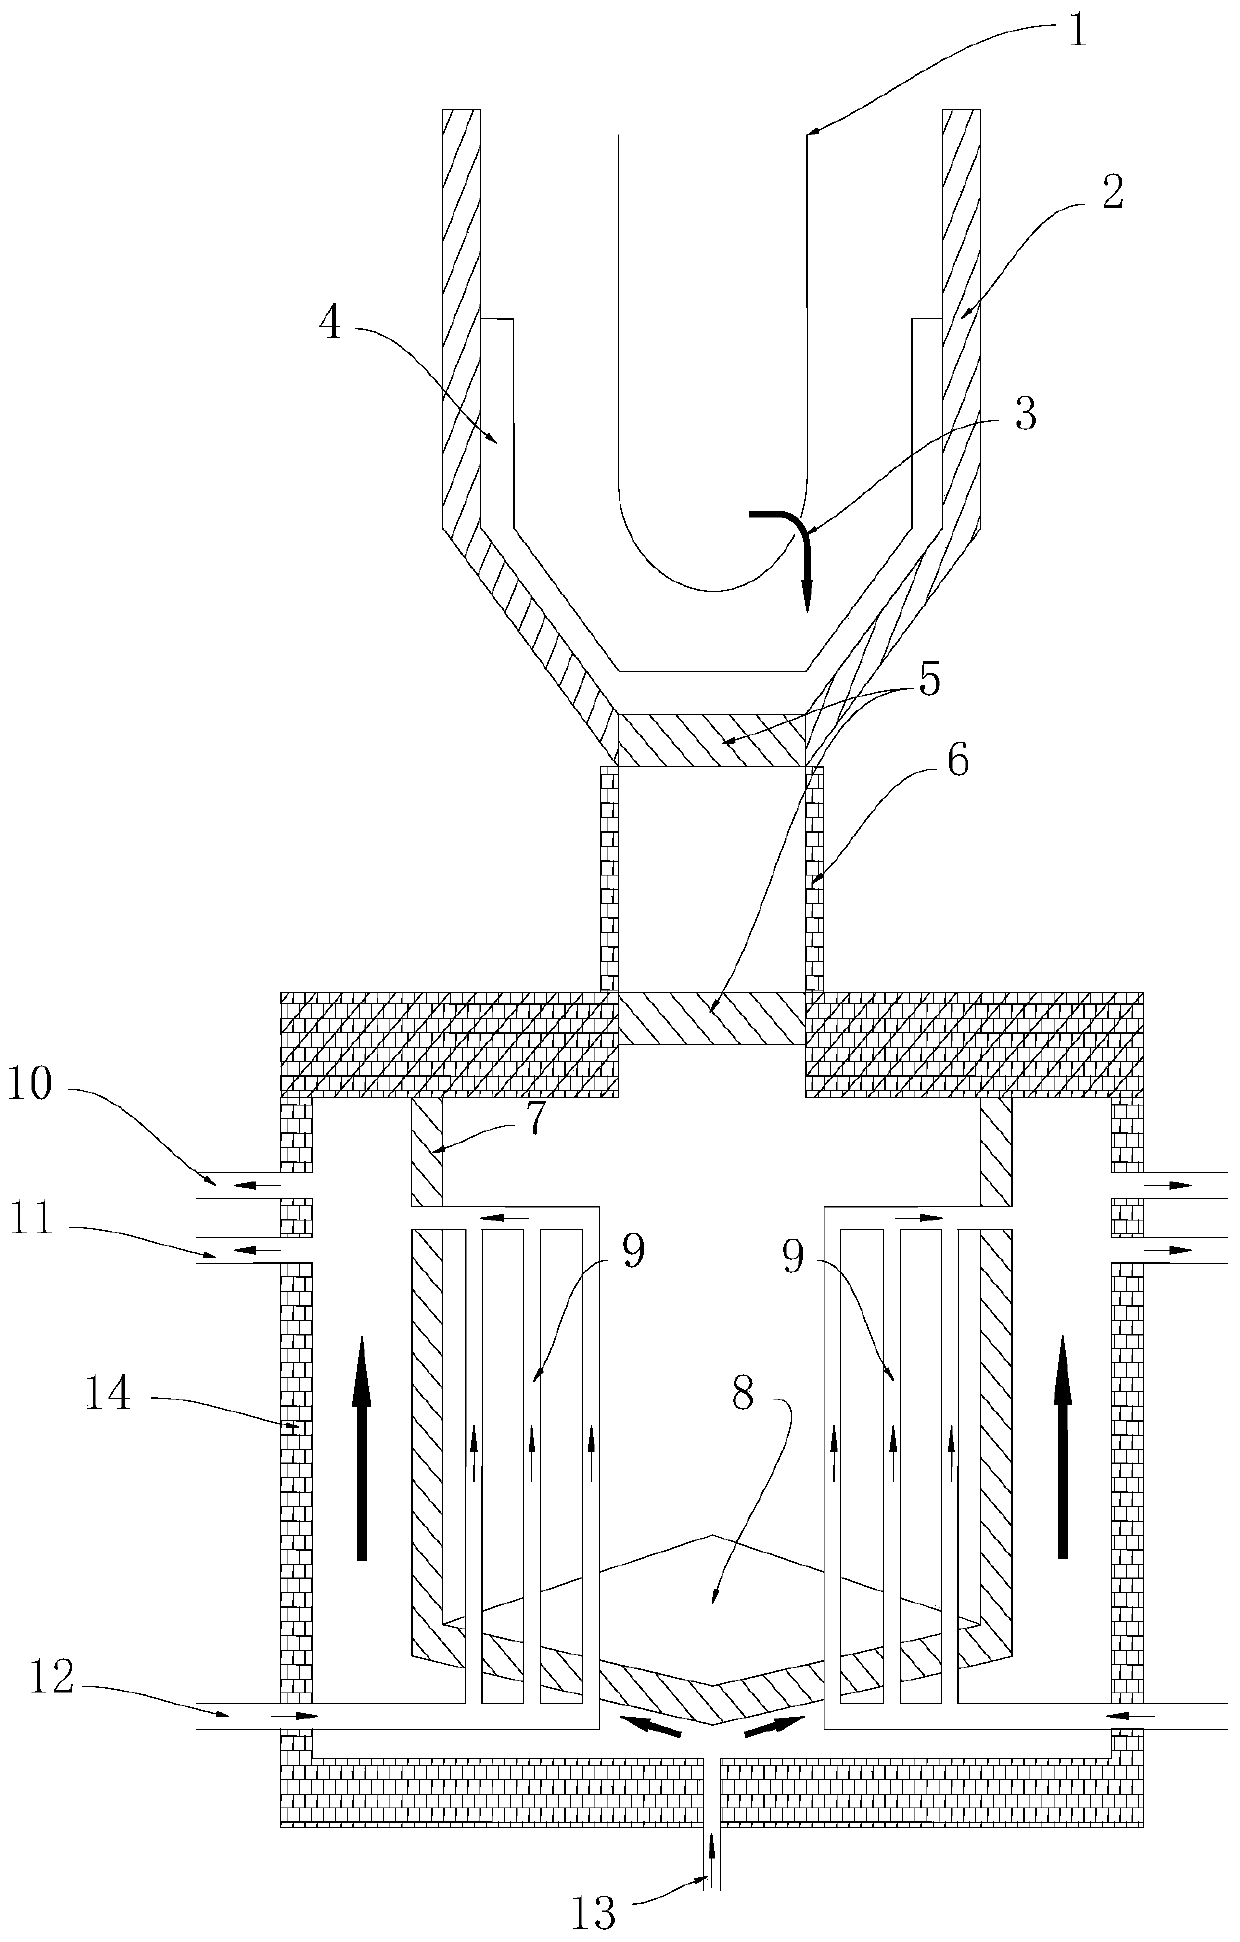 A core melt trap with internal cooling capability